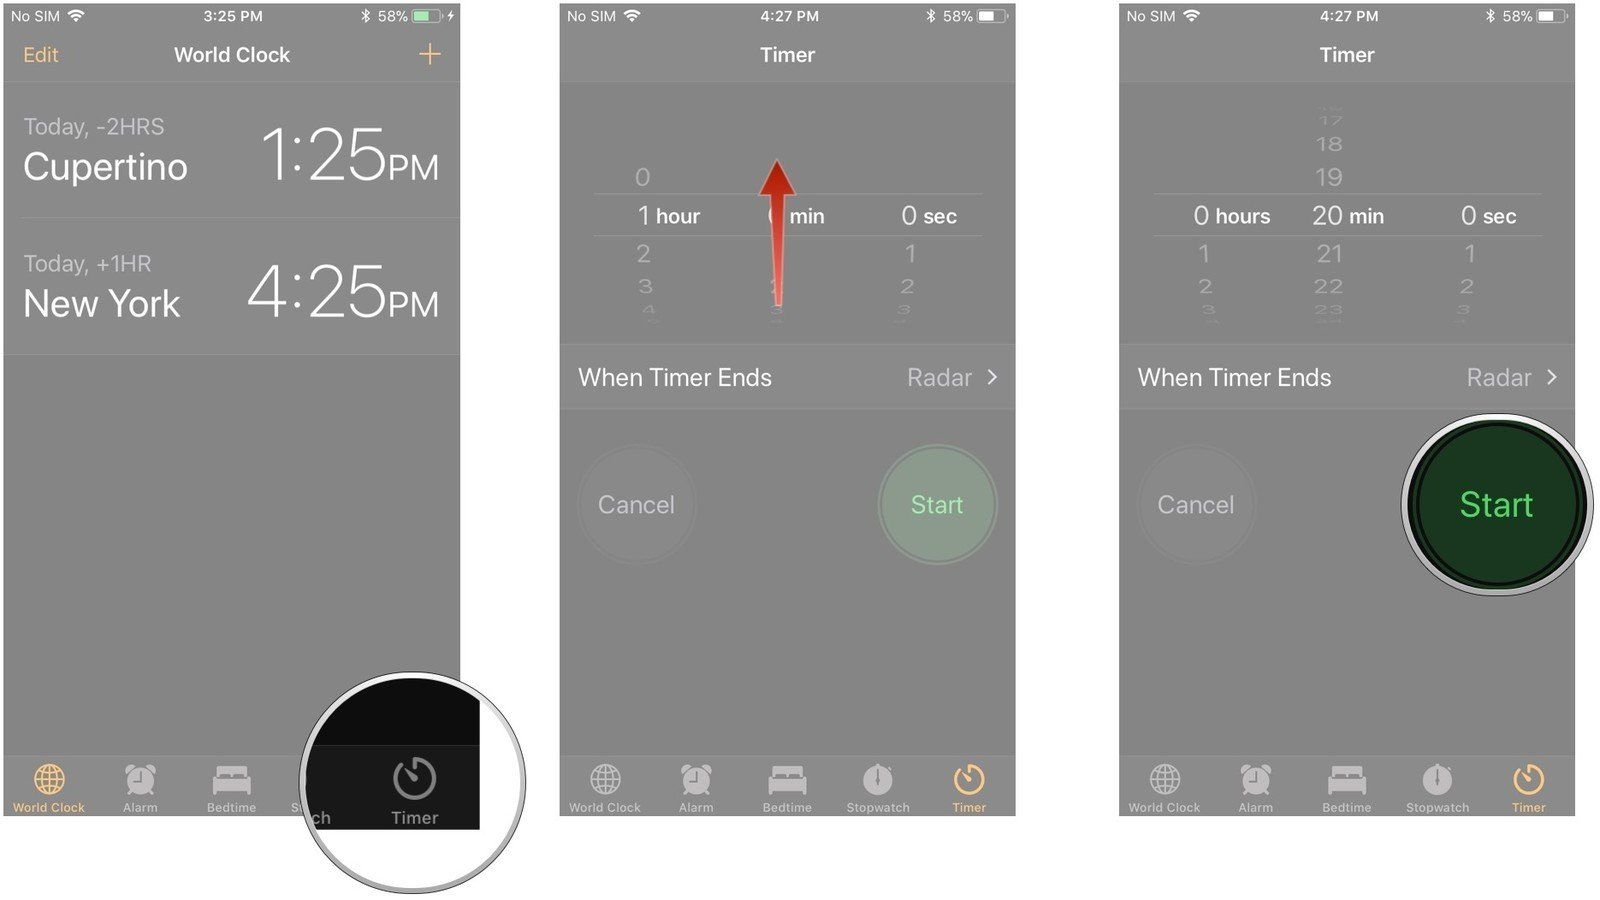 How To Use The Timer In The Clock App On Iphone And Ipad | Imore